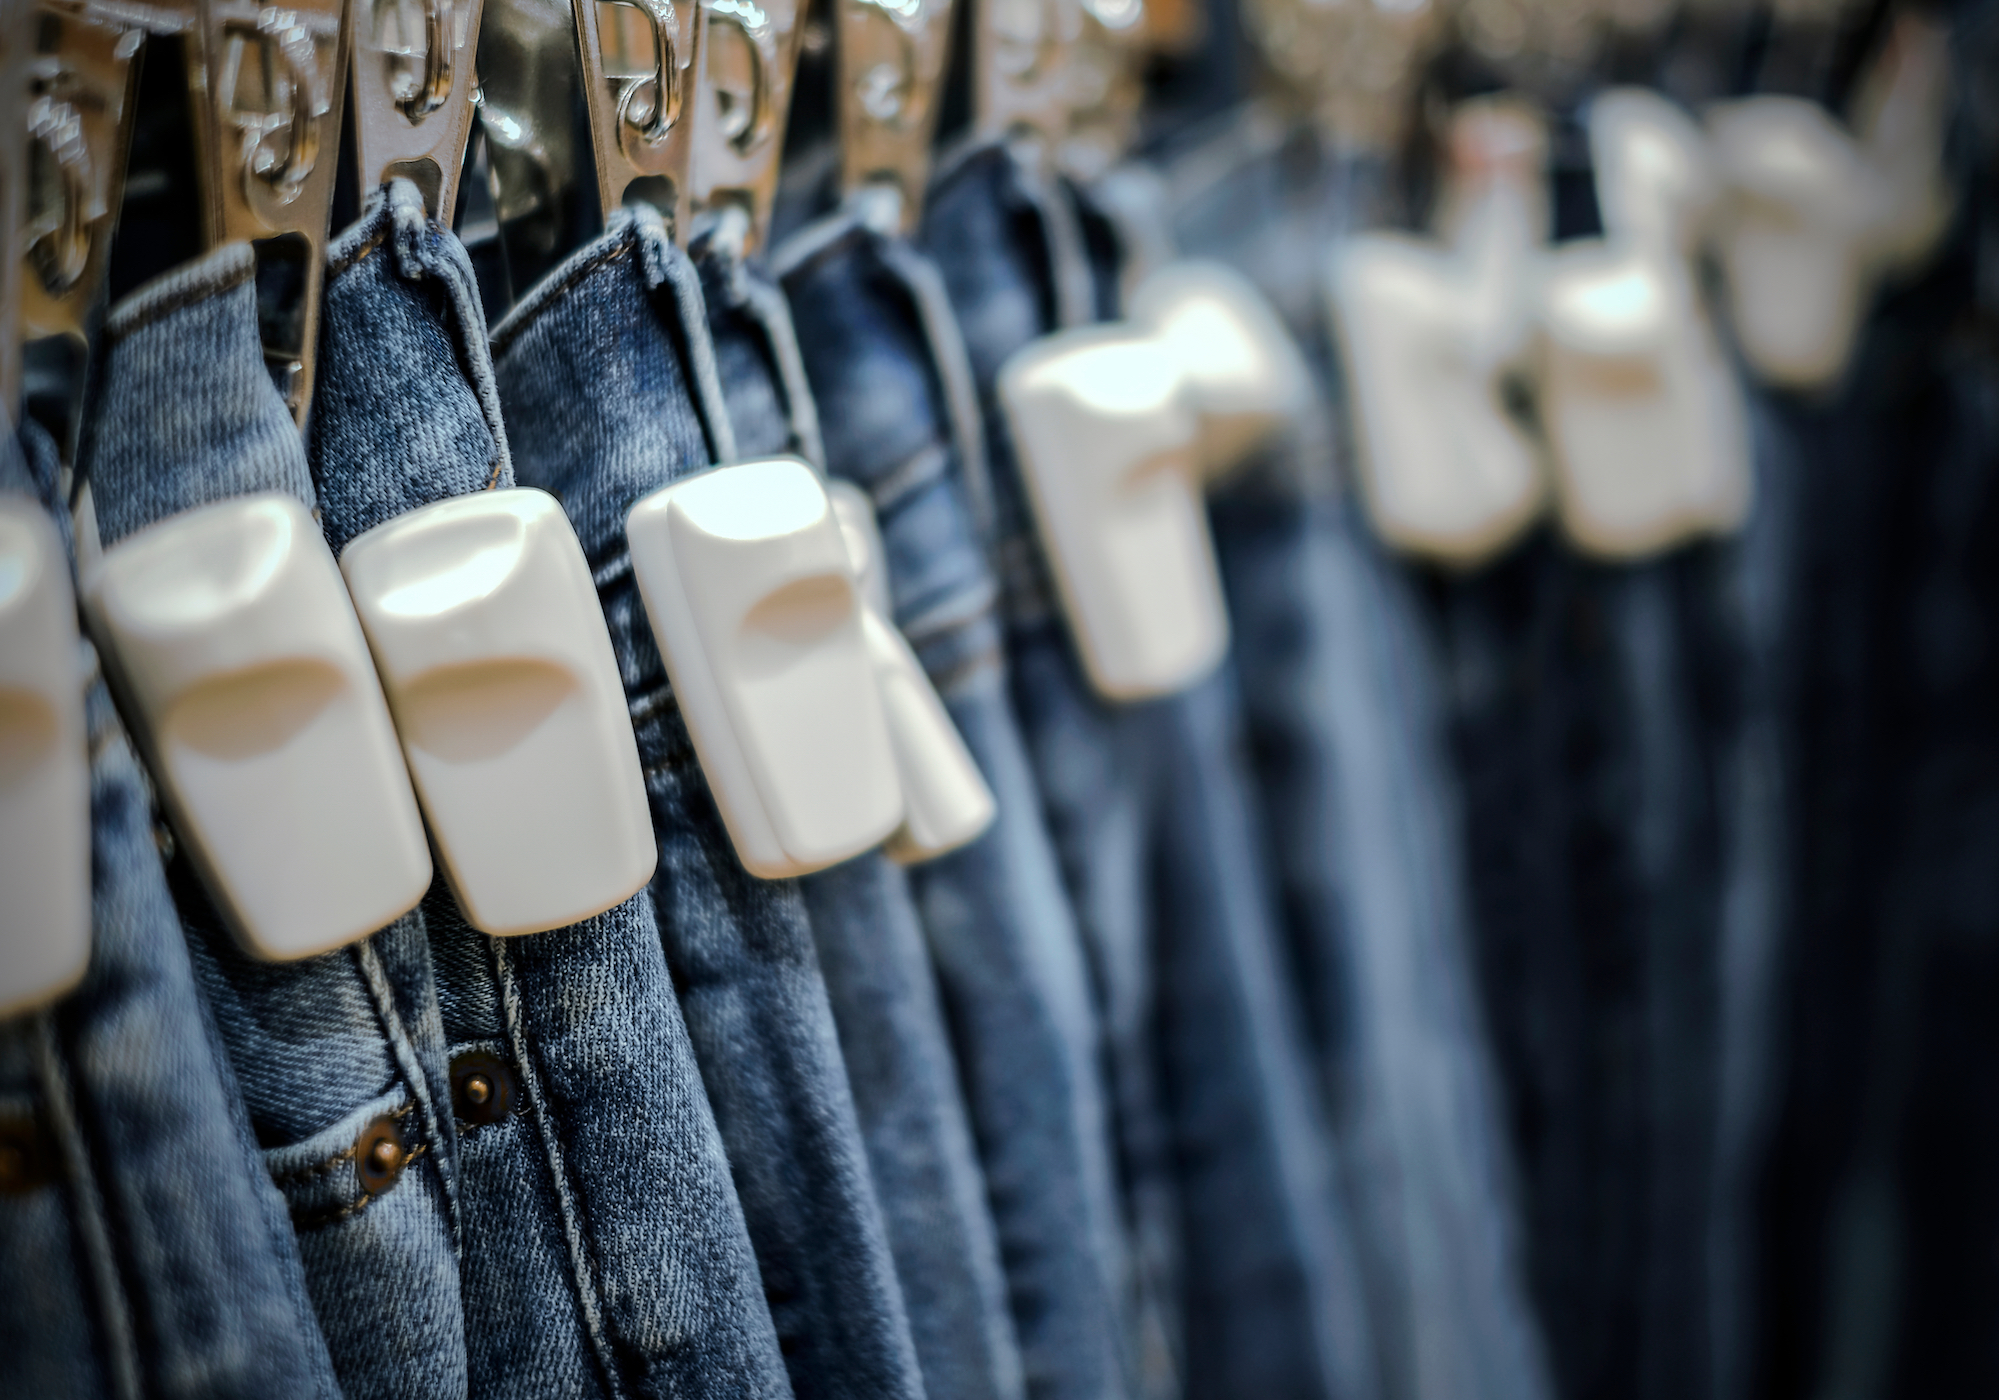 RFID tags are the future of technology in retail, according to RMIT Senior Lecturer Dr Rajikshore Nayak.